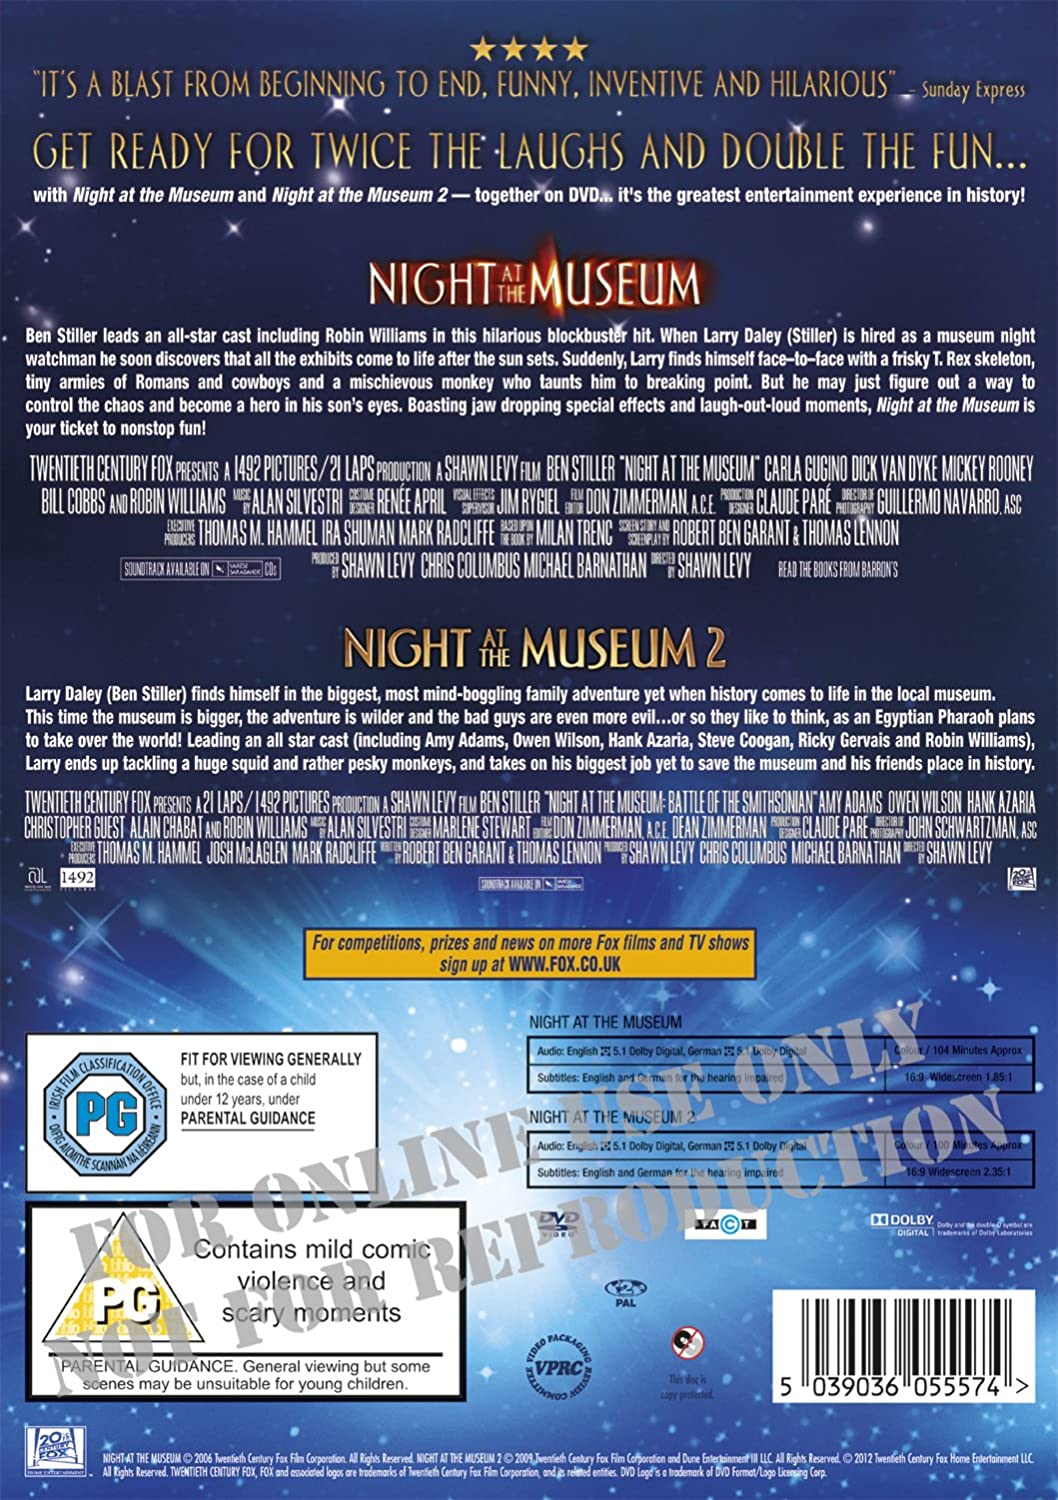 Night at the Museum / Night at the Museum 2 Double Pack [2006]